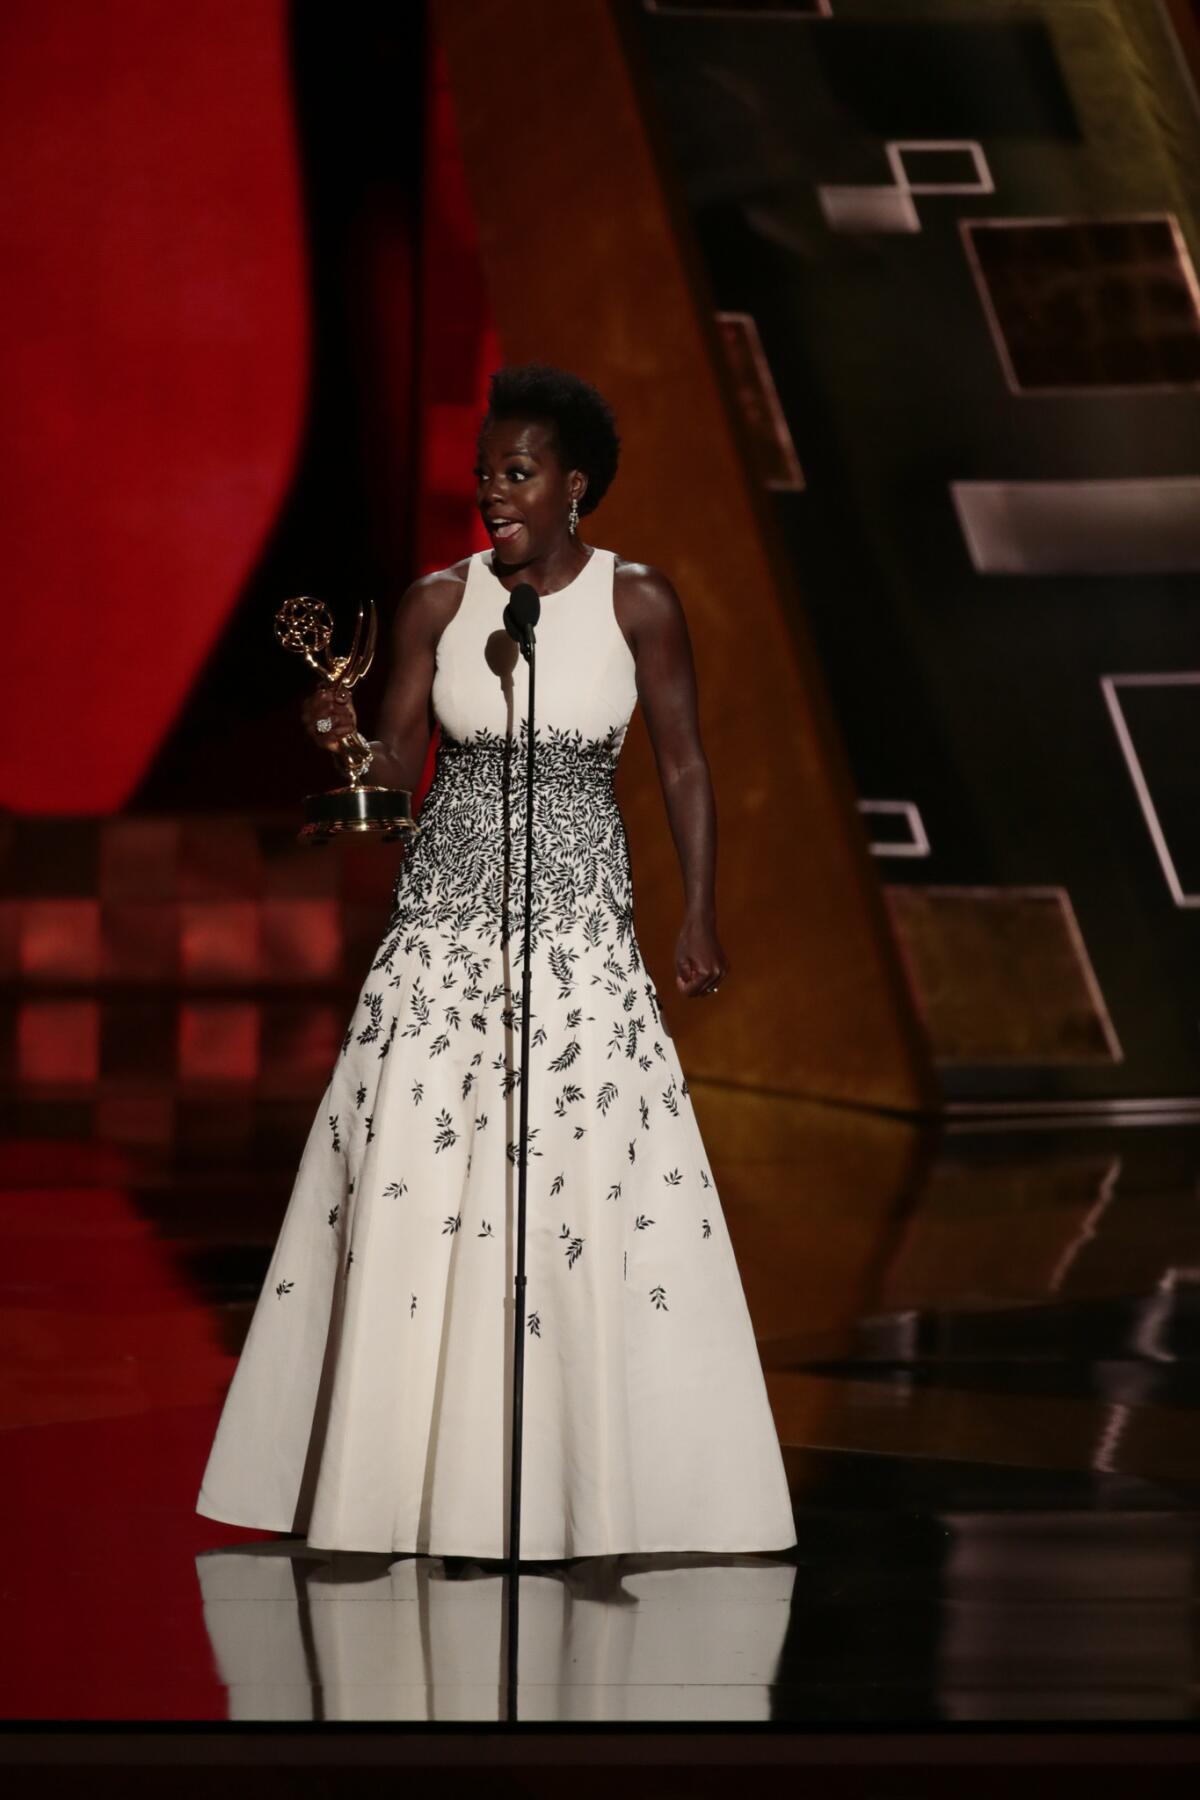 LOS ANGELES, CA., September 20, 2015: Viola Davis is the First African America woman to win an EMMY for Outstanding Lead Actress in a Drama Series for HOW TO GET AWAY WITH MURDER is the show at the 67th Annual Primetime Emmy Awards at the Microsoft Theater in Los Angeles, CA. (Robert Gauthier / Los Angeles Times)